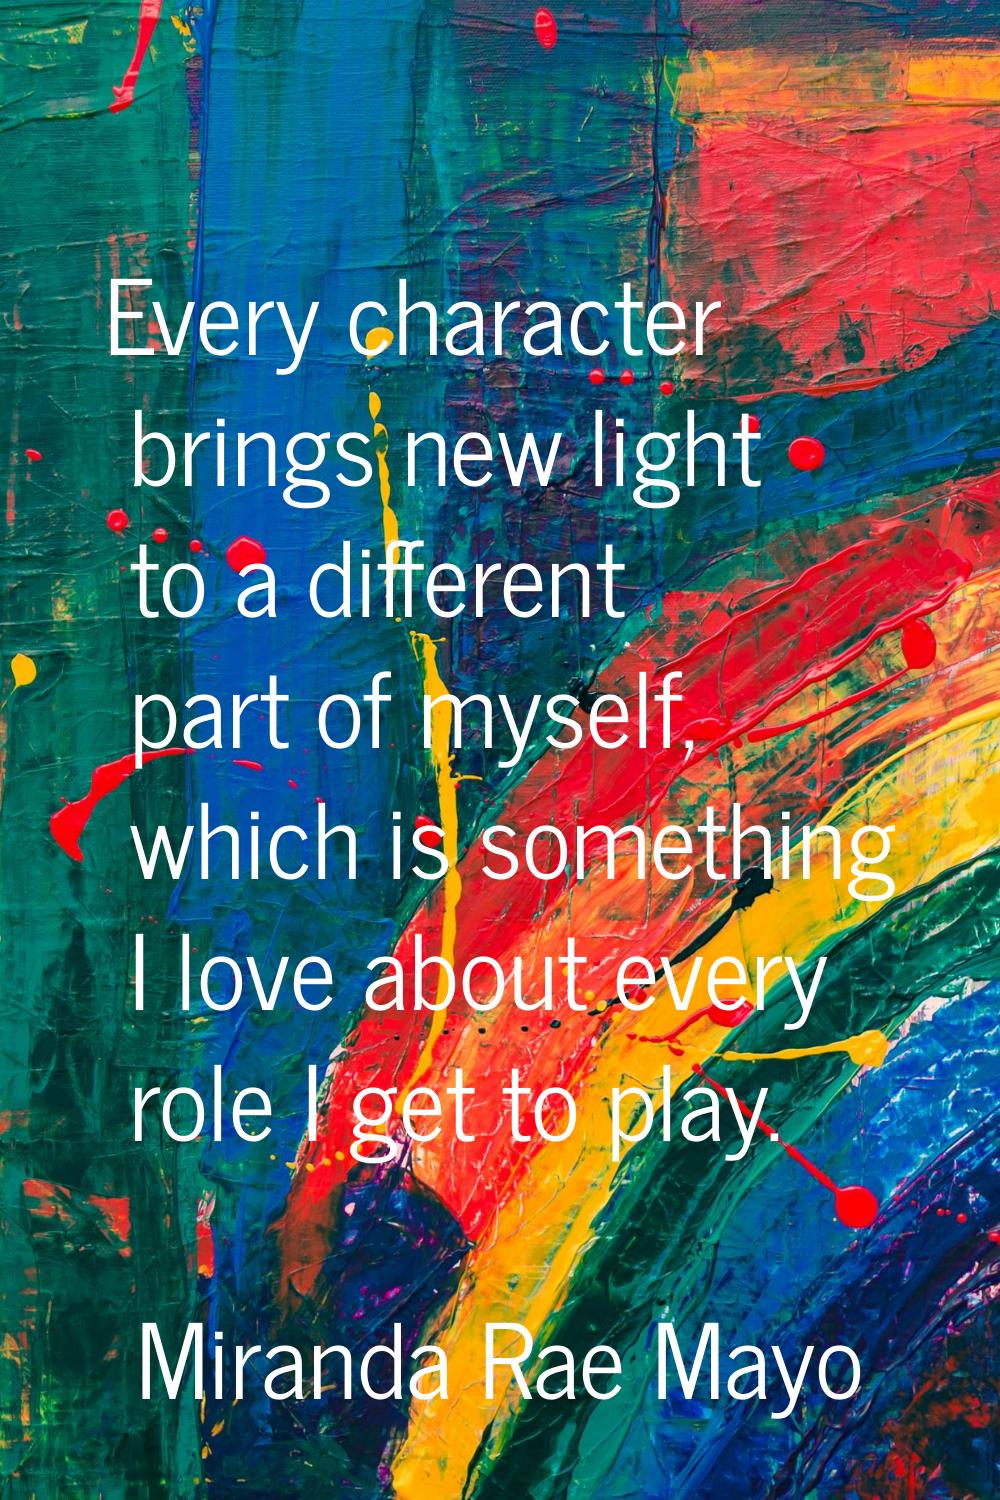 Every character brings new light to a different part of myself, which is something I love about eve